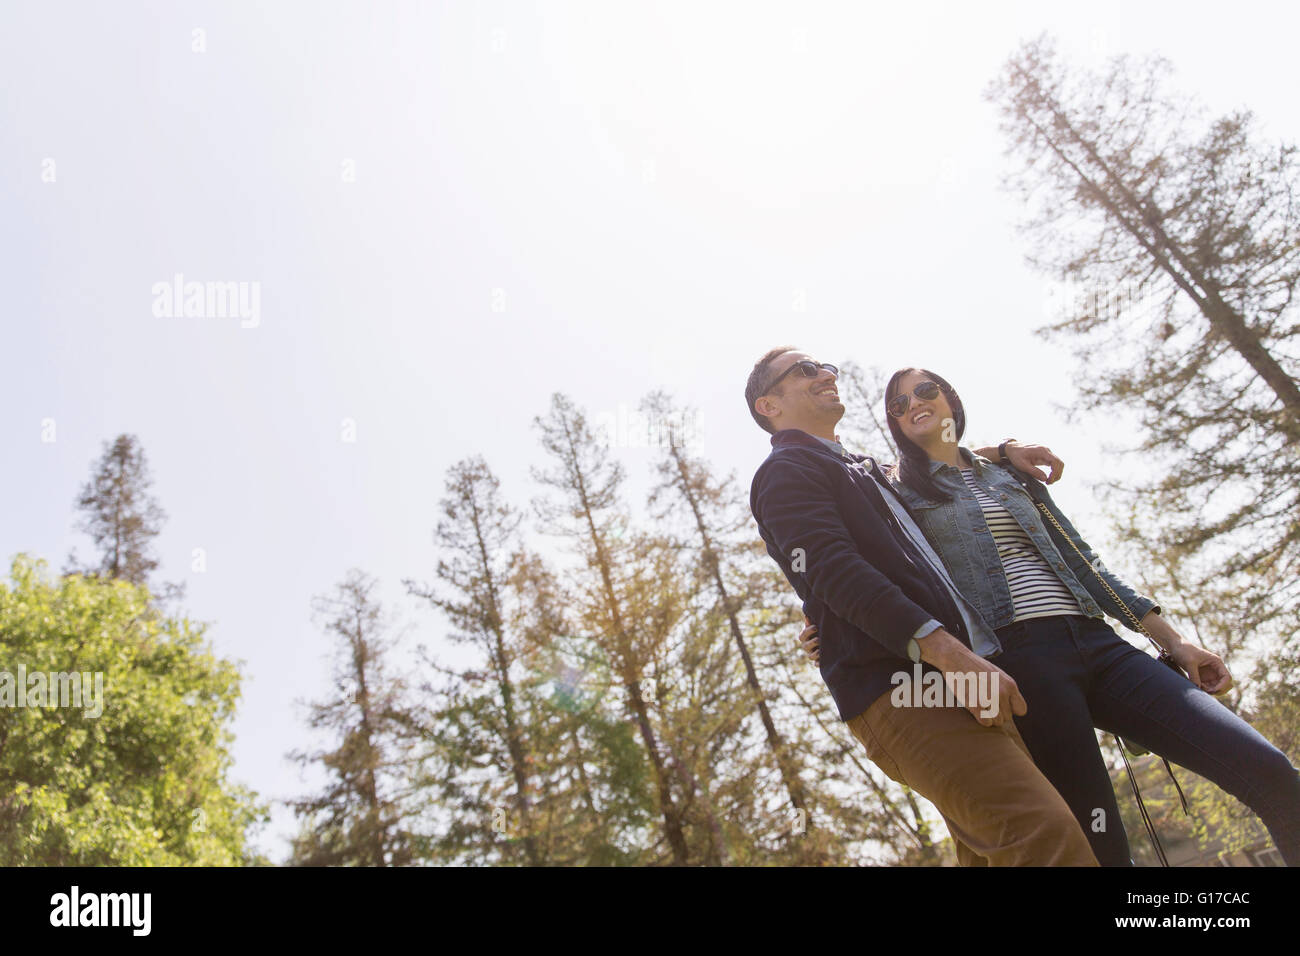 Low angle view of couple strolling wearing sunglasses Stock Photo